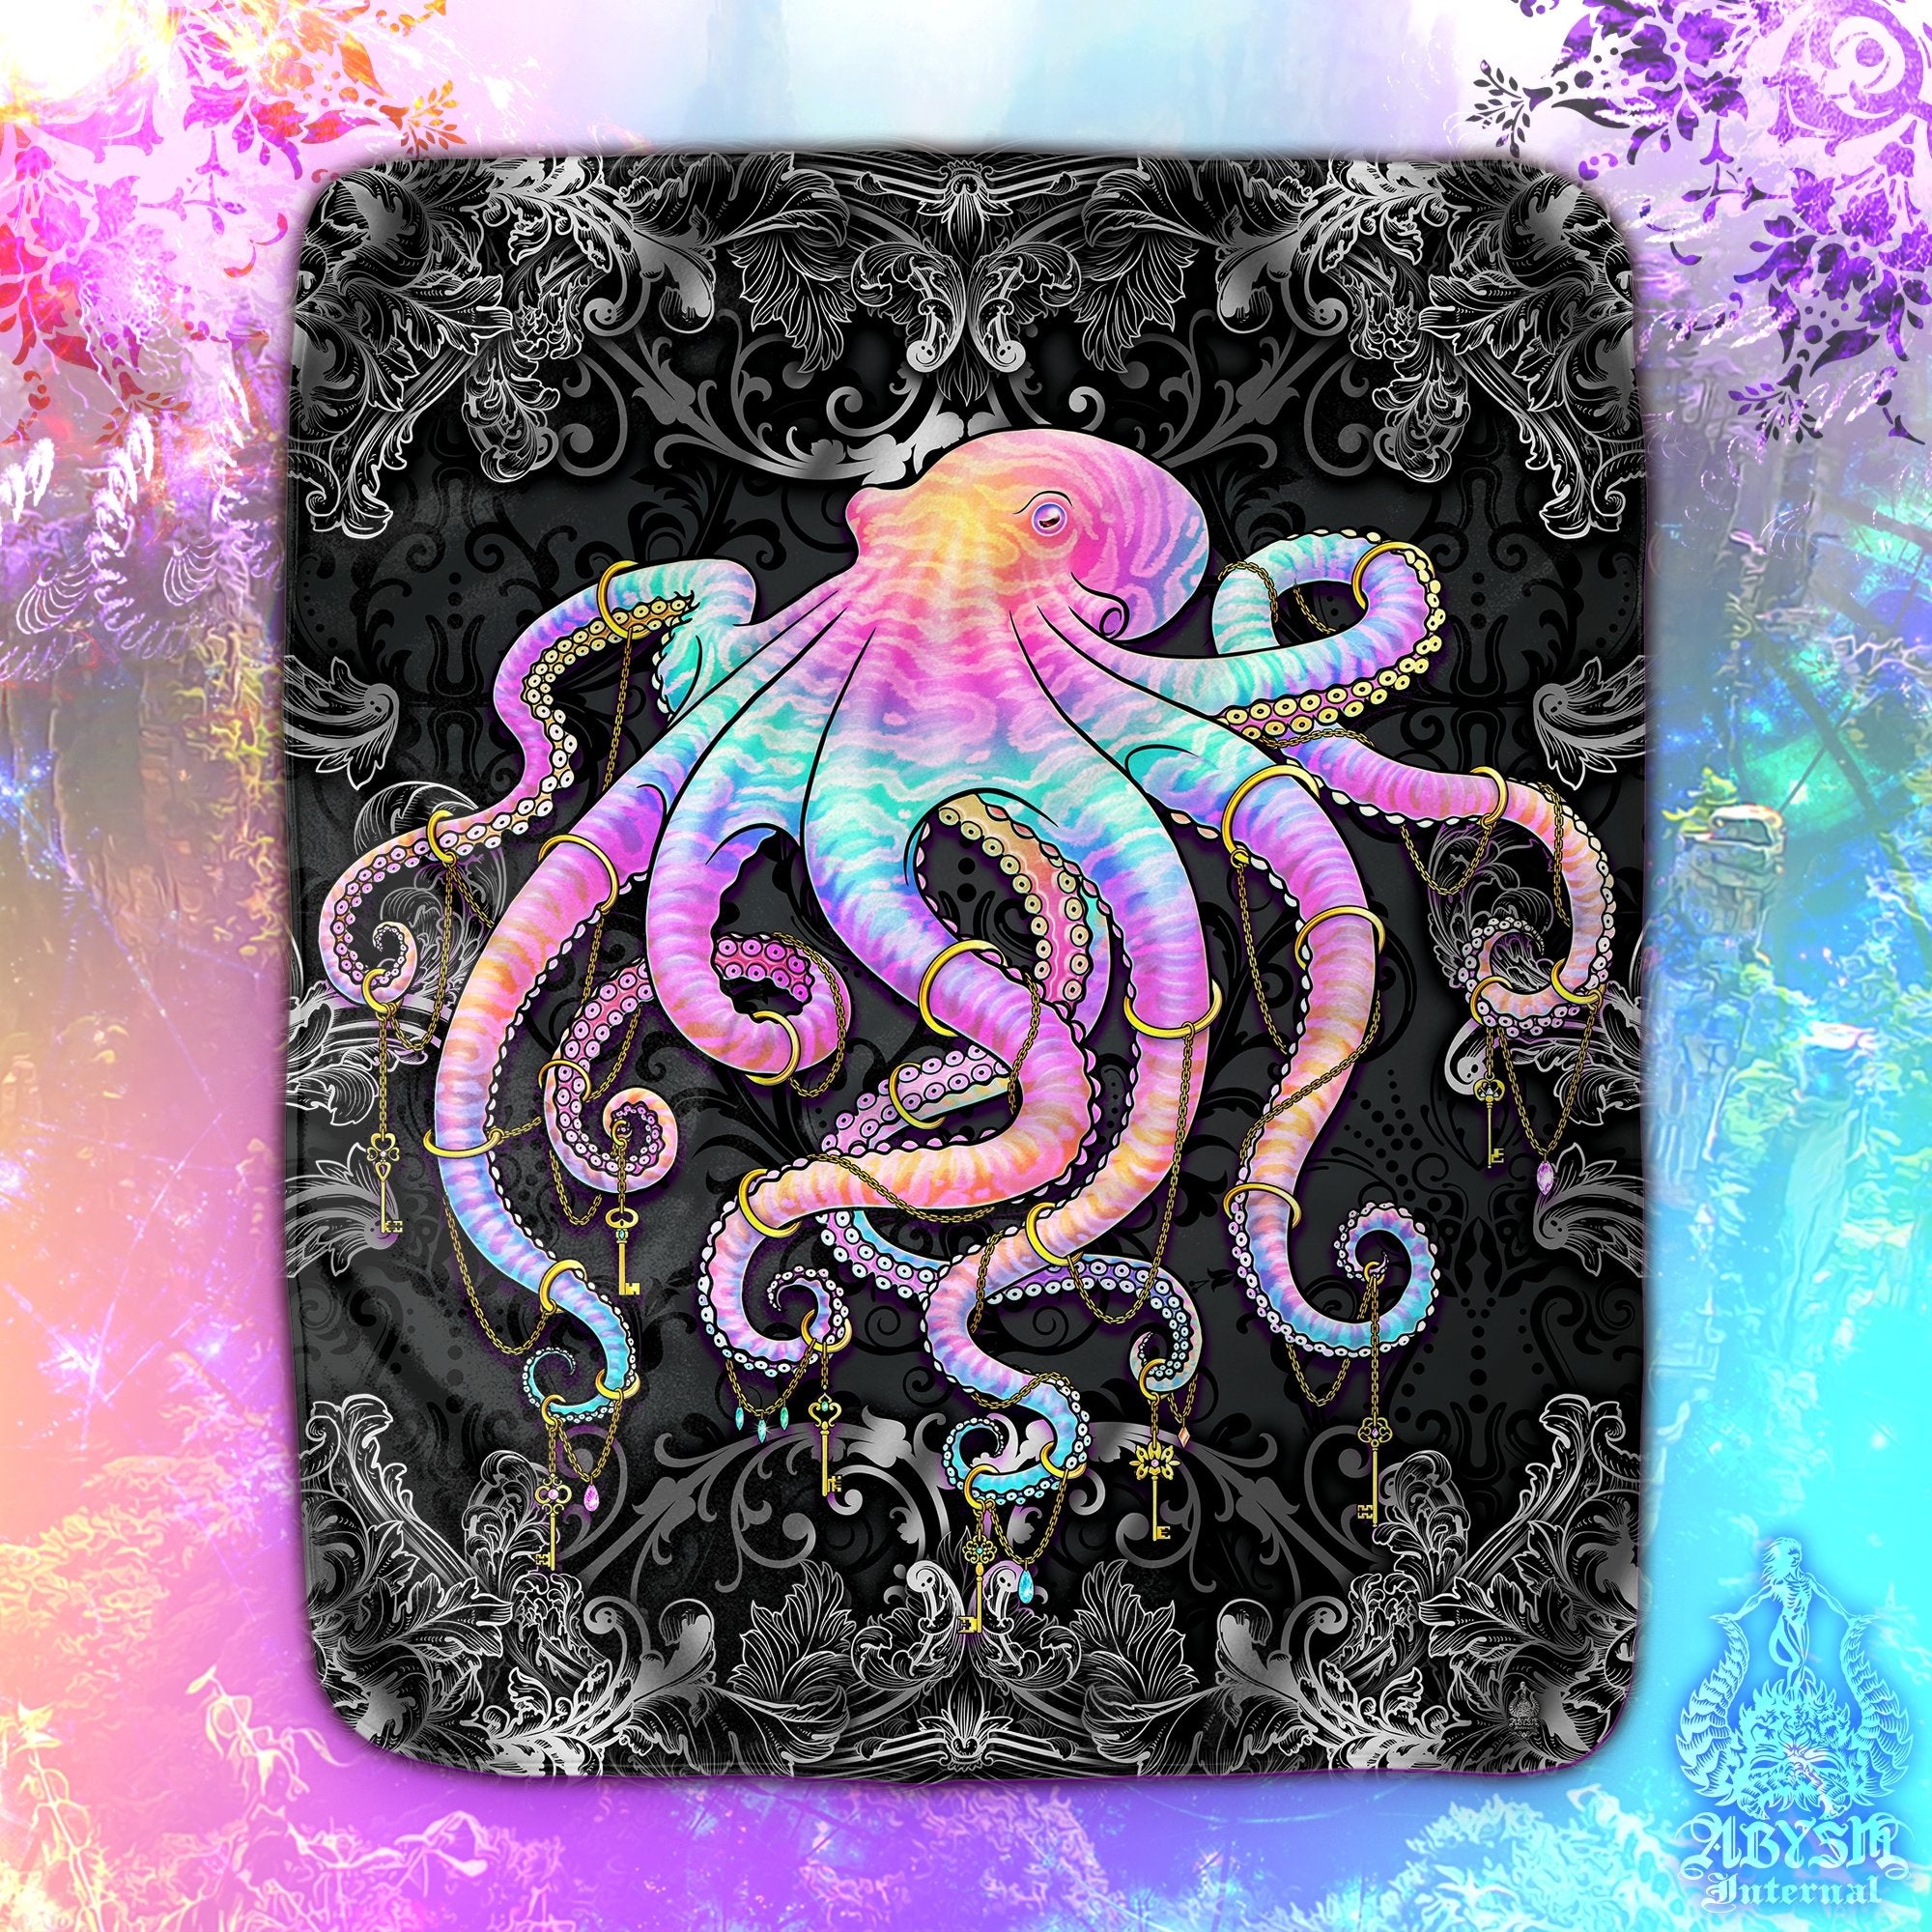 Indie Throw Fleece Blanket, Psychedelic Gift, Boho Beach Home Decor, Eclectic and Funky Gift - Dark Pastel Punk , Black Octopus - Abysm Internal